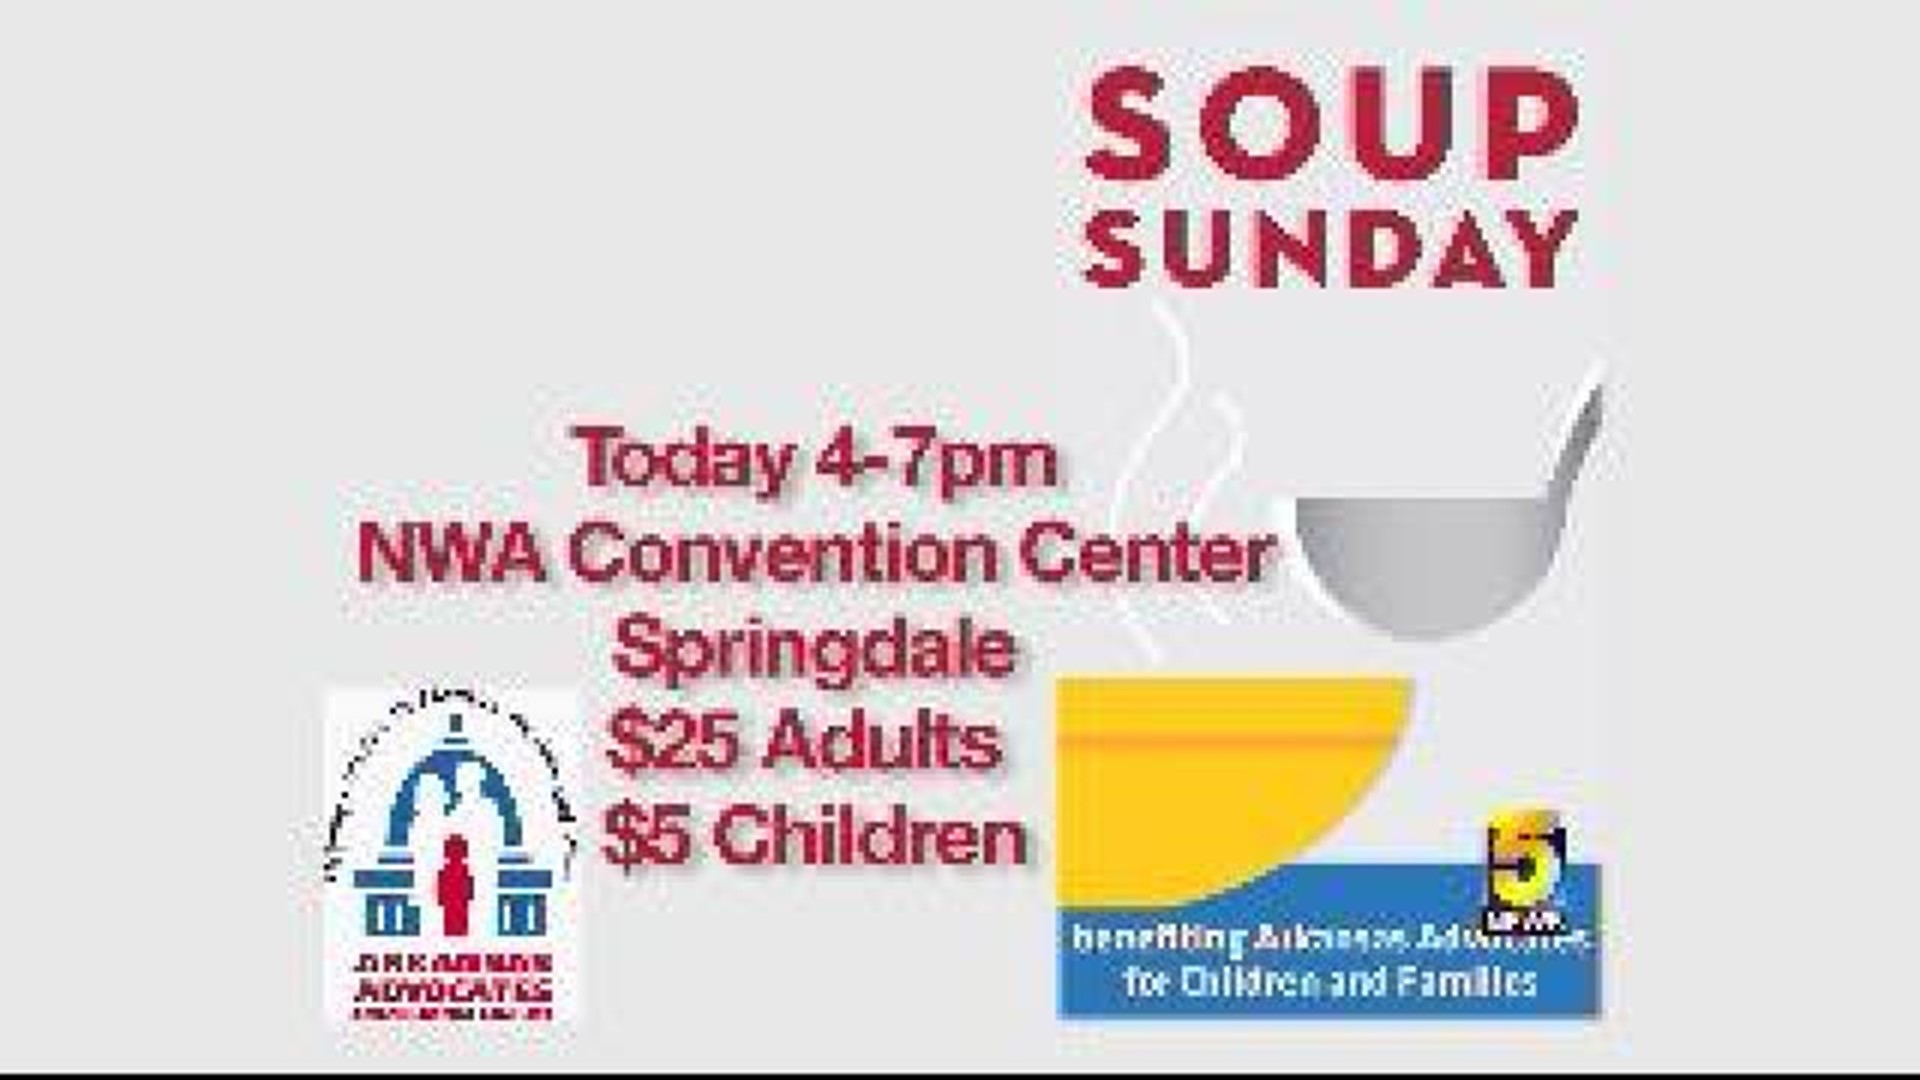 Soup Sunday at the NWA Convention Center